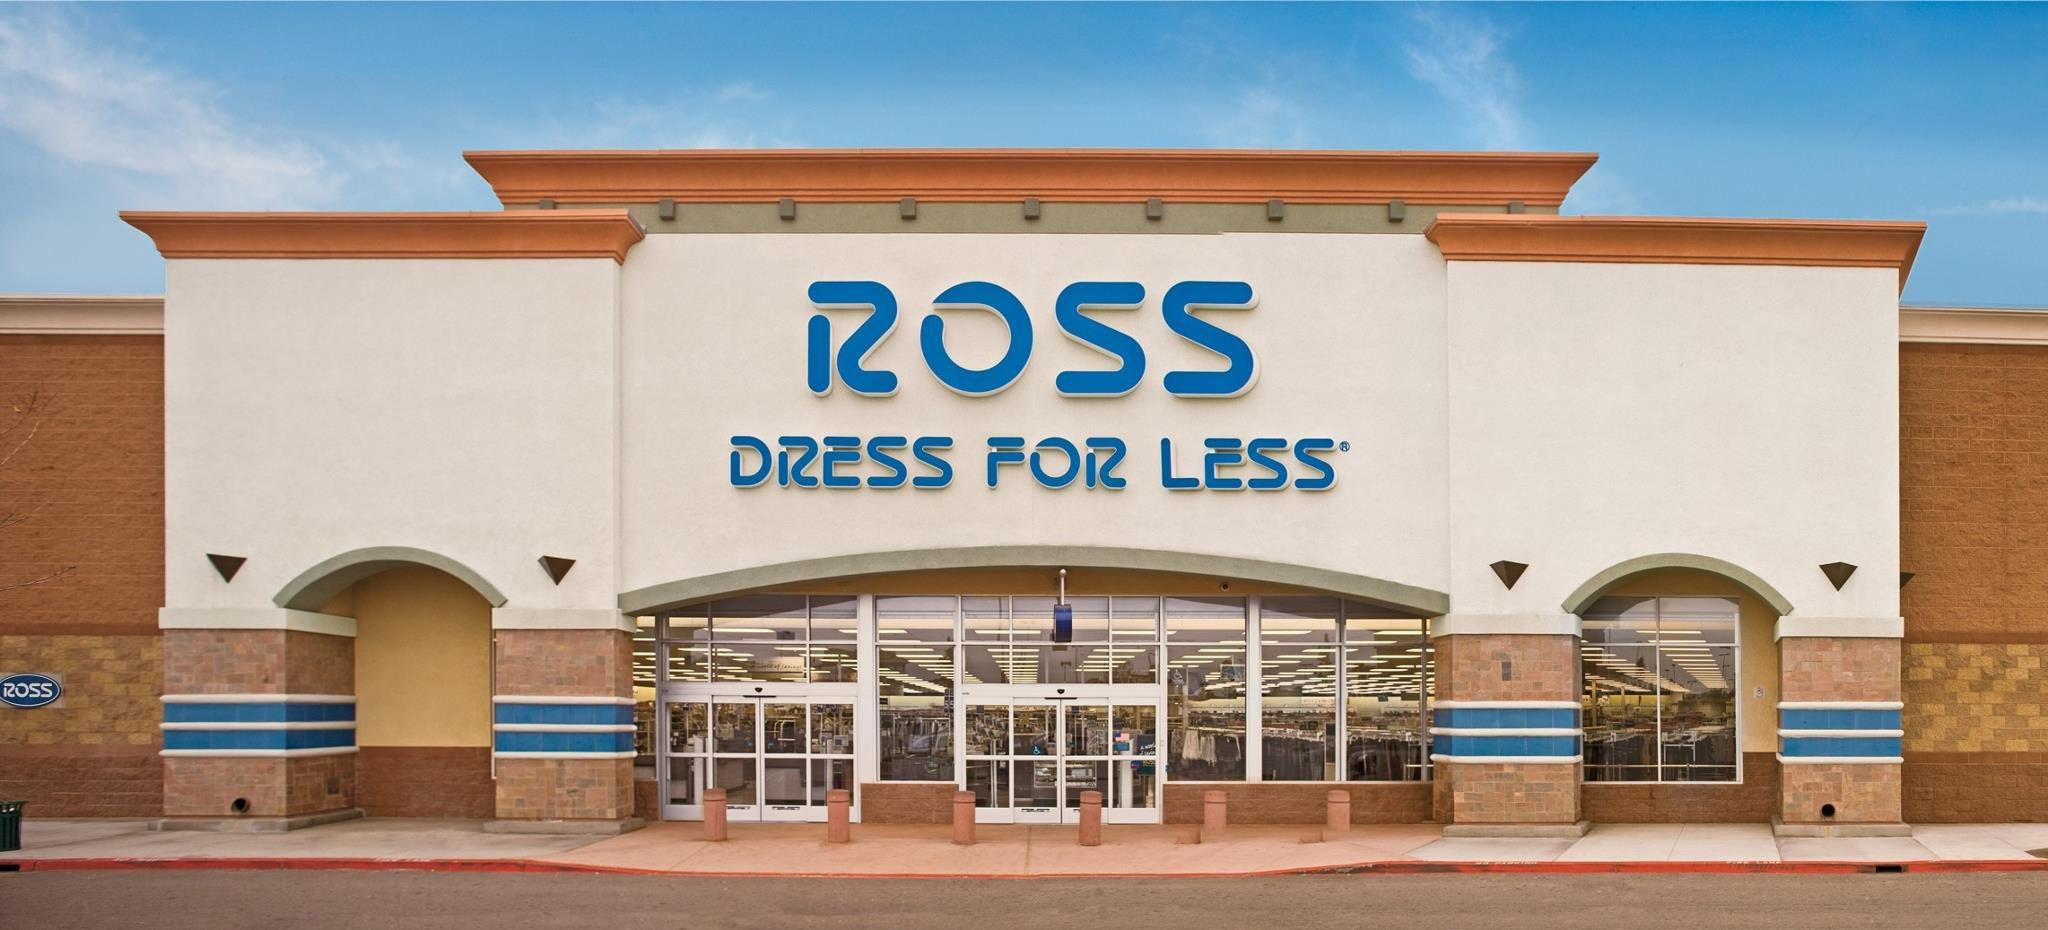 Ross Dress for Less Logo - About Us